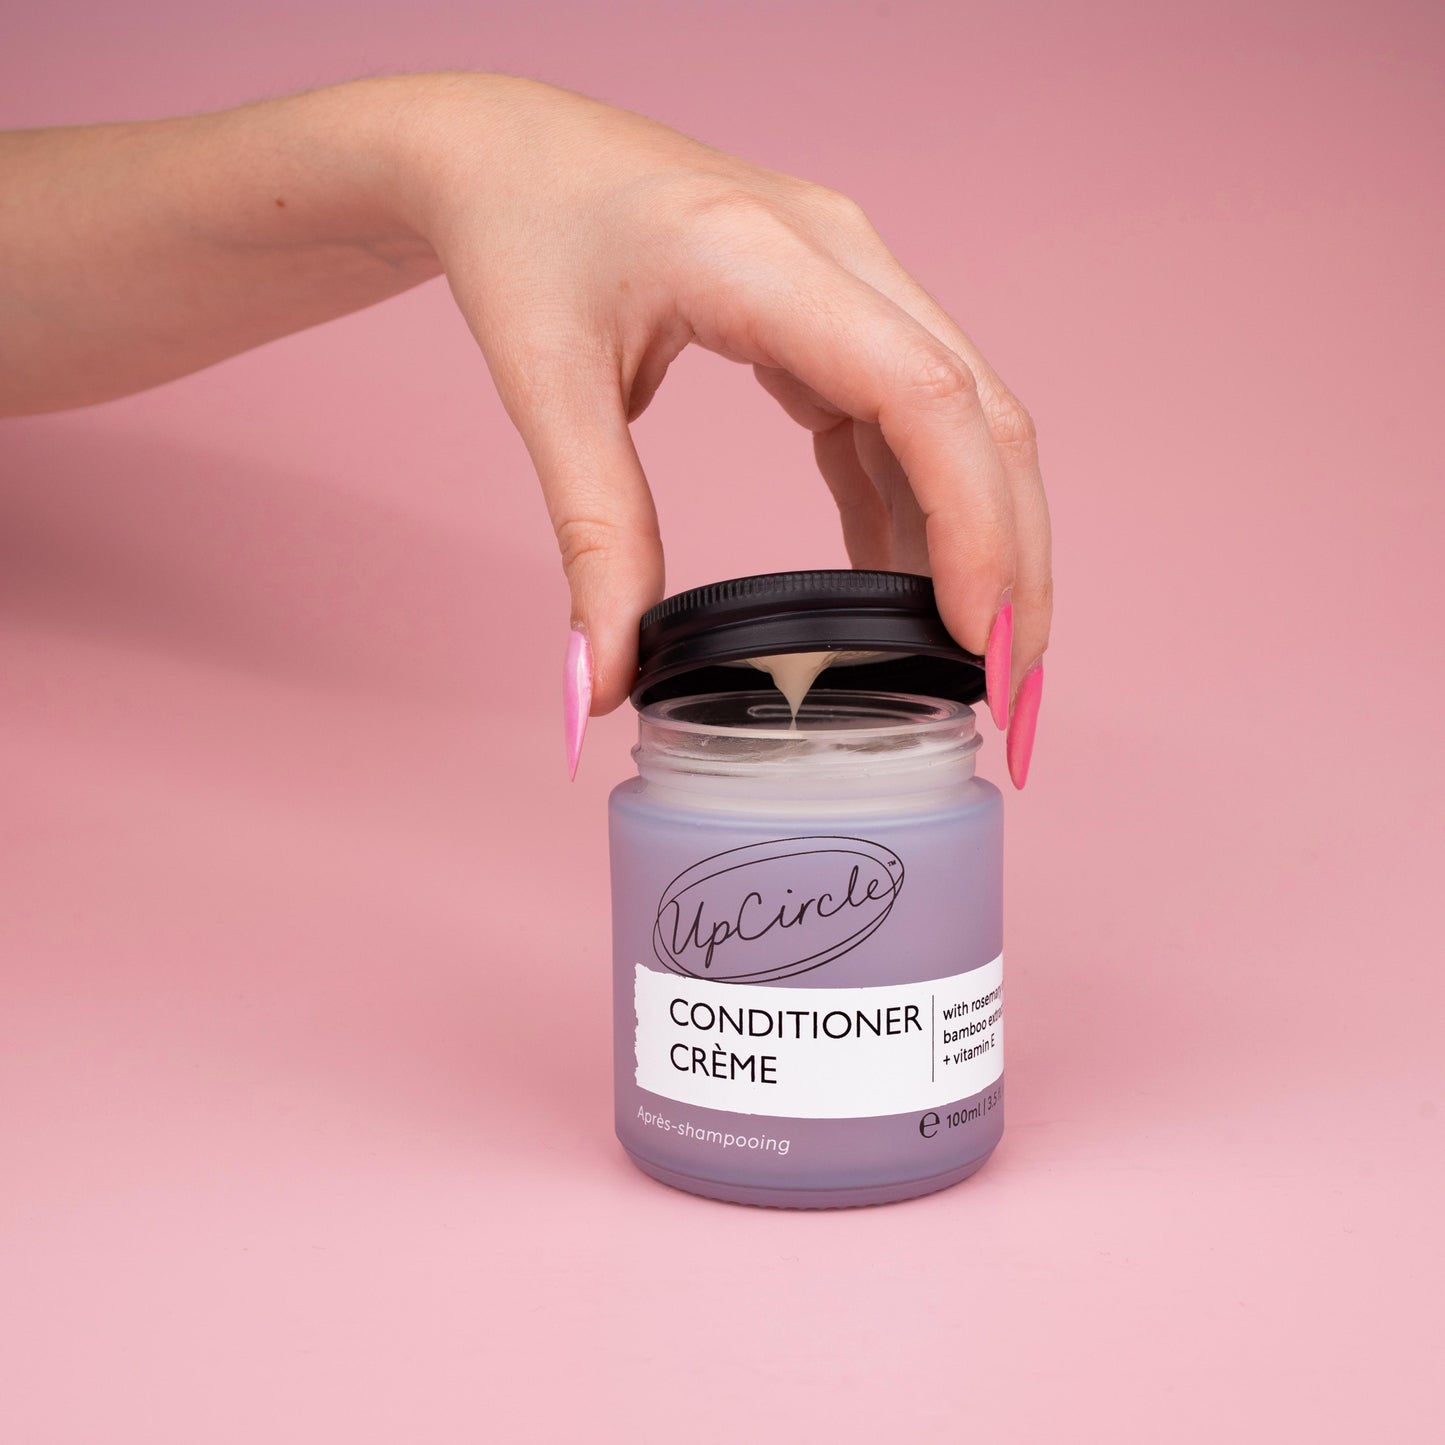 lifestyle photo of upcircle's conditioner cream on a pink background. the conditioner is in a blue/lilac frosted glass jar with black aluminium lid. The jar is open and you can see the creamy texture of the conditioner inside. The lid being lifted off the jar by a woman's hand with multi tonal pink finger nails